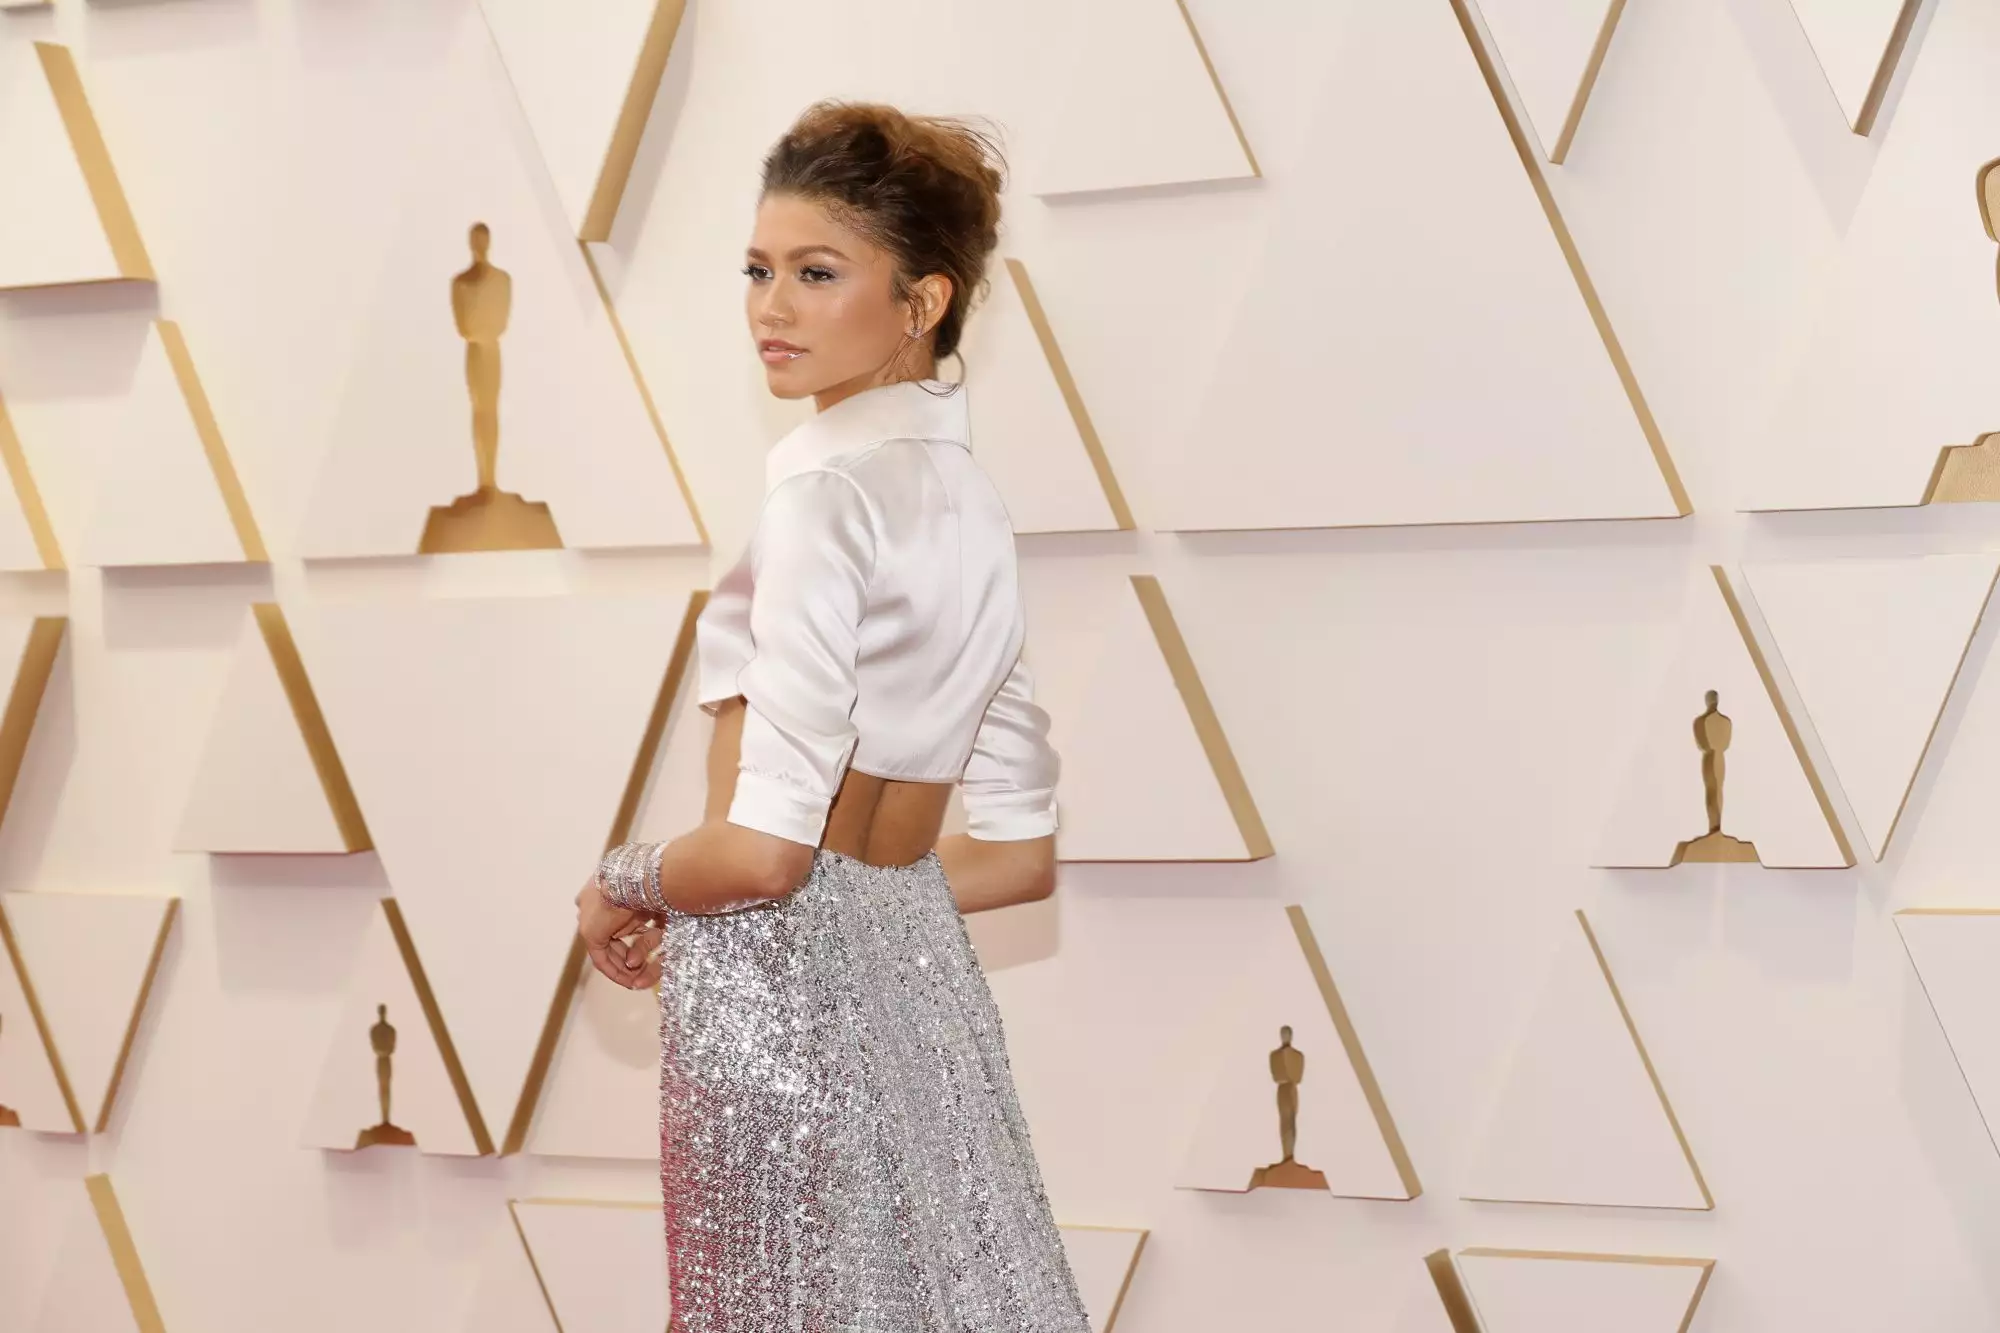 Zendaya and Timothée Chalamet Oscars looks cause spike in searches for  'unisex fashion